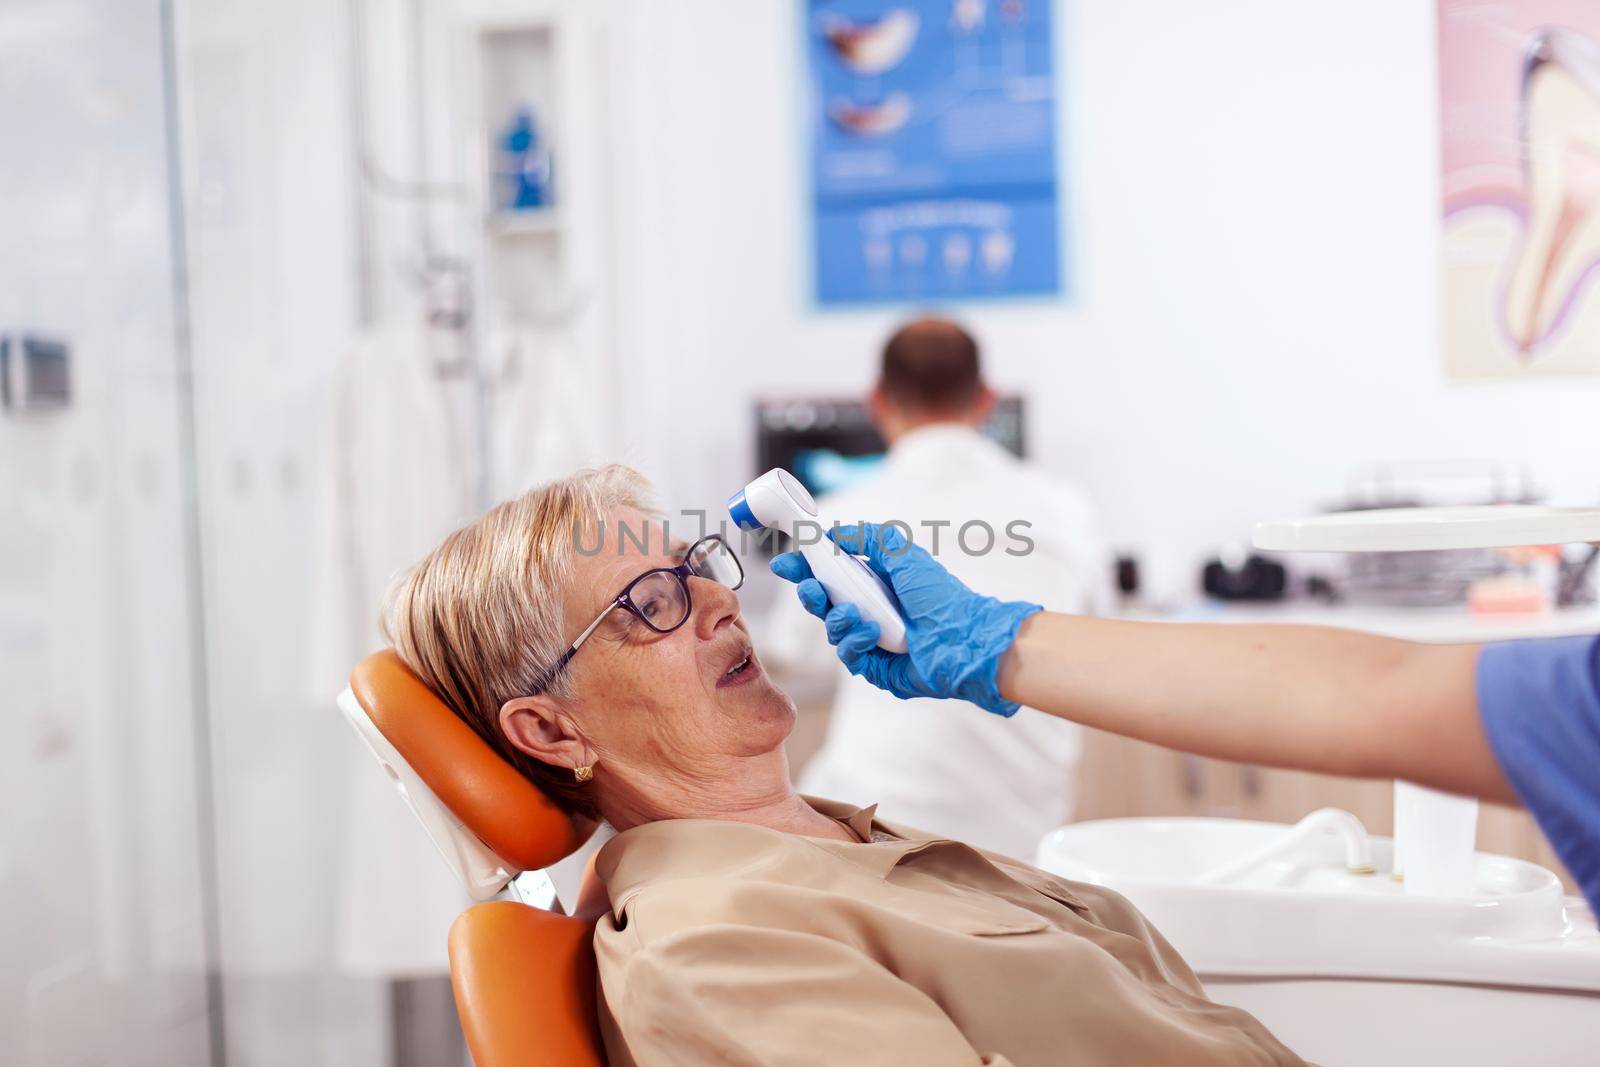 Dentist assistant holding digital body temperature indicator in front of patient forhead sitting on chair. Medical specialist in dental clinic taking patient temperature using digital device.